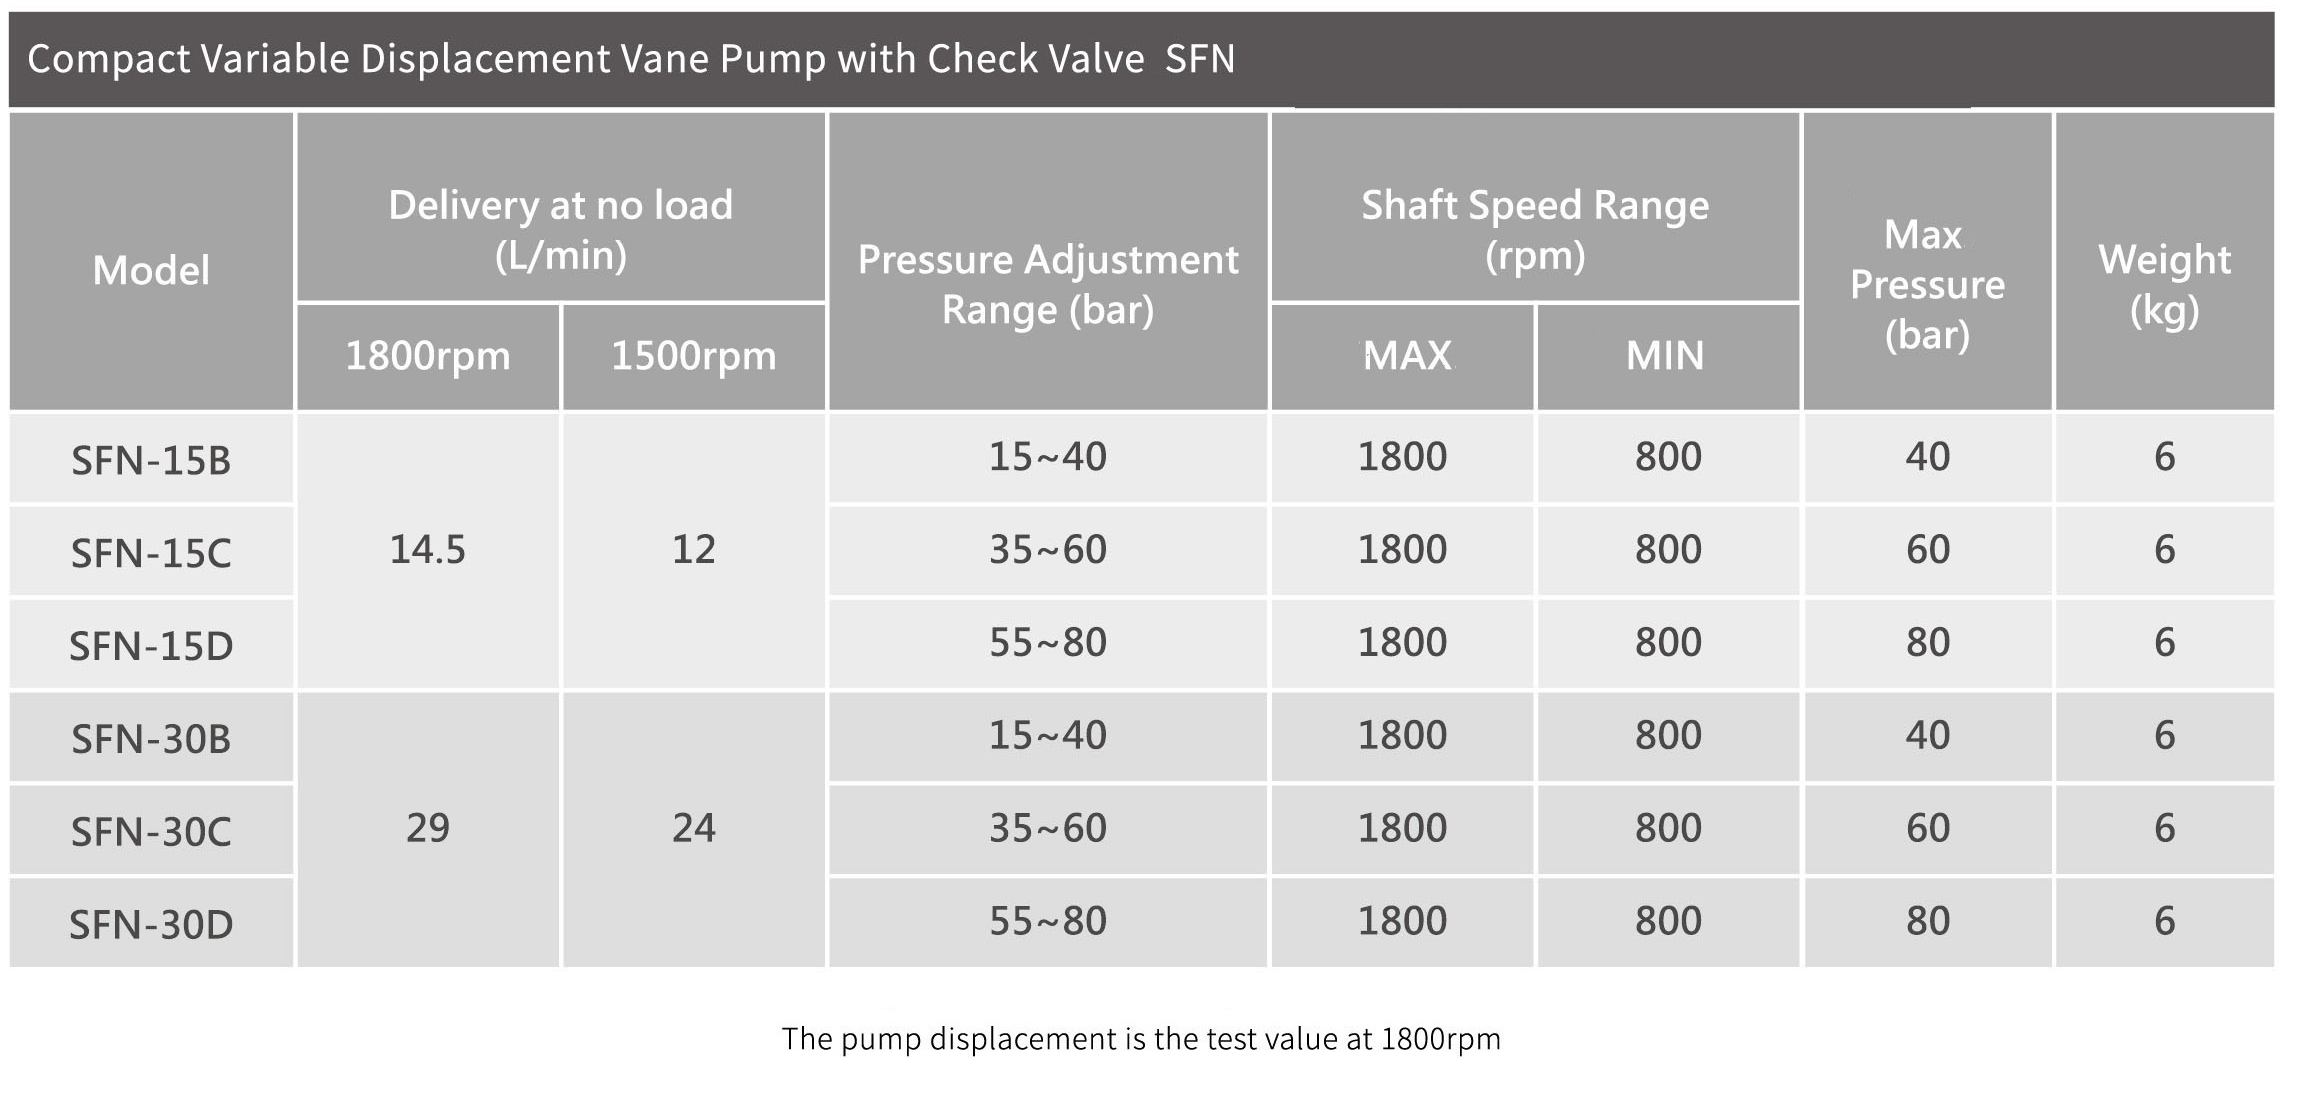 CML Compact Variable Vane Pump with Check Valve SFN Technical Data